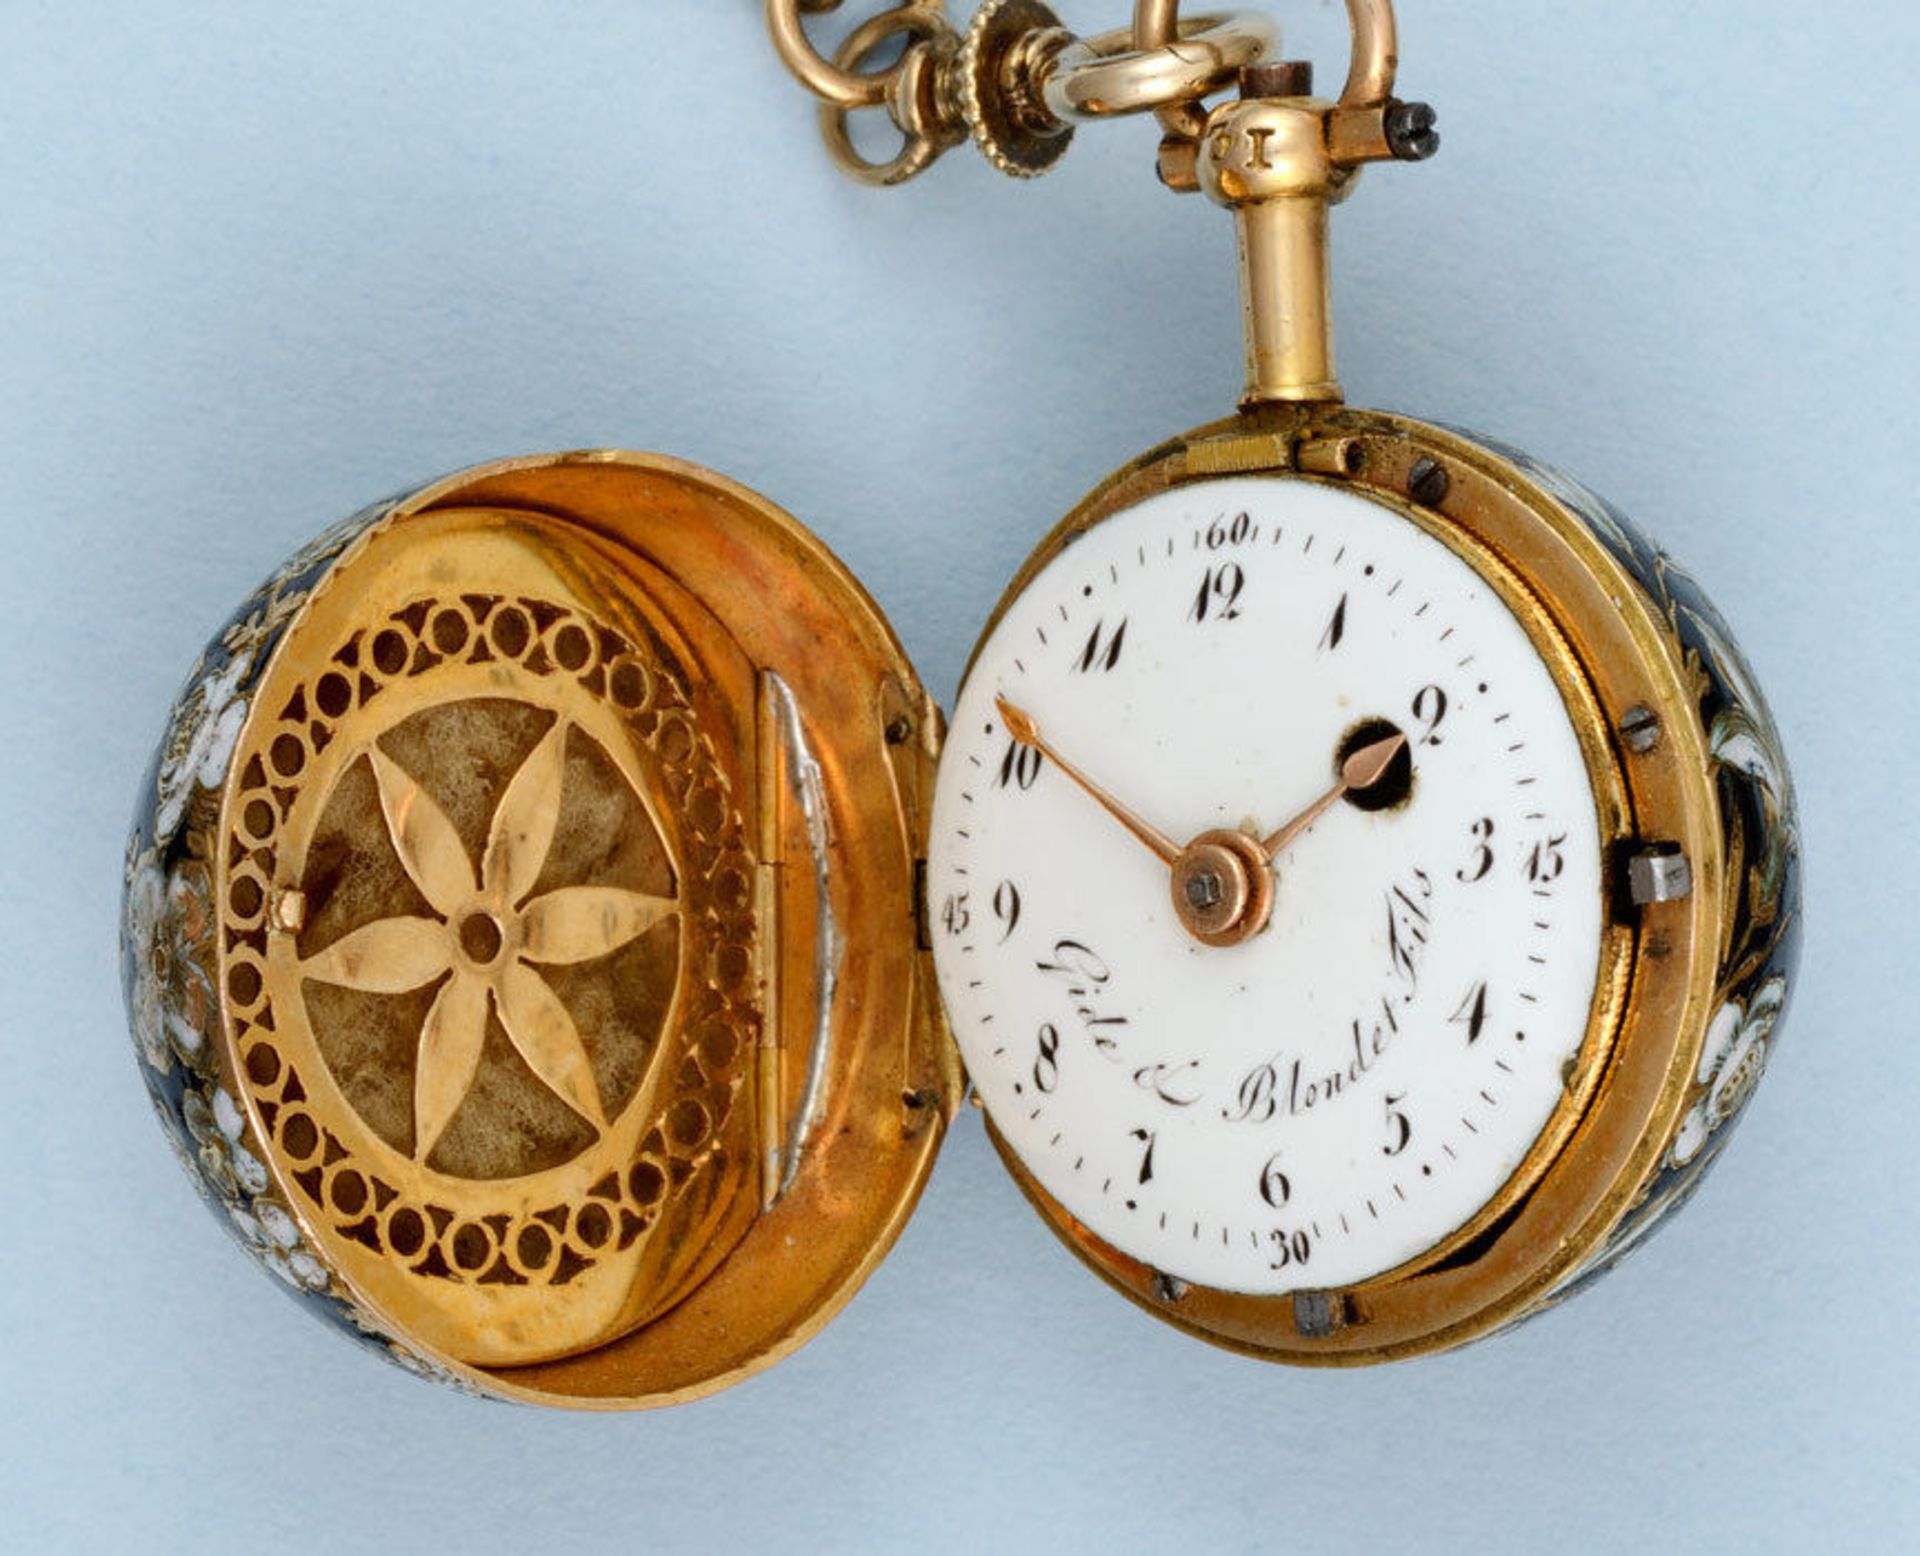 Gold and Enamel Verge Ball Watch and Chain - Image 6 of 7